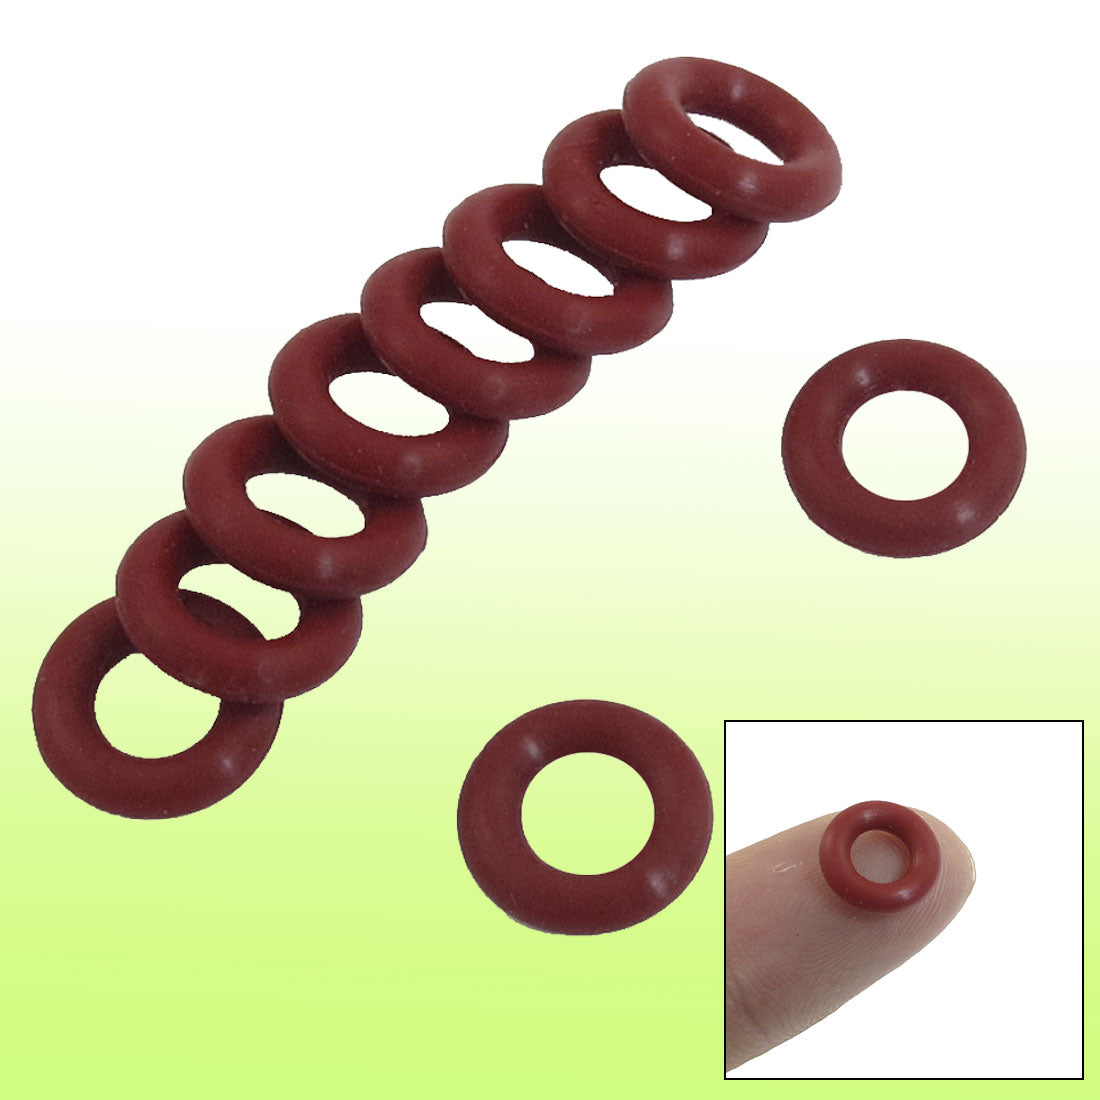 uxcell Uxcell 10 Pcs Red Rubber 10mm x 2.5mm Oil Seal O Rings Gaskets Washers